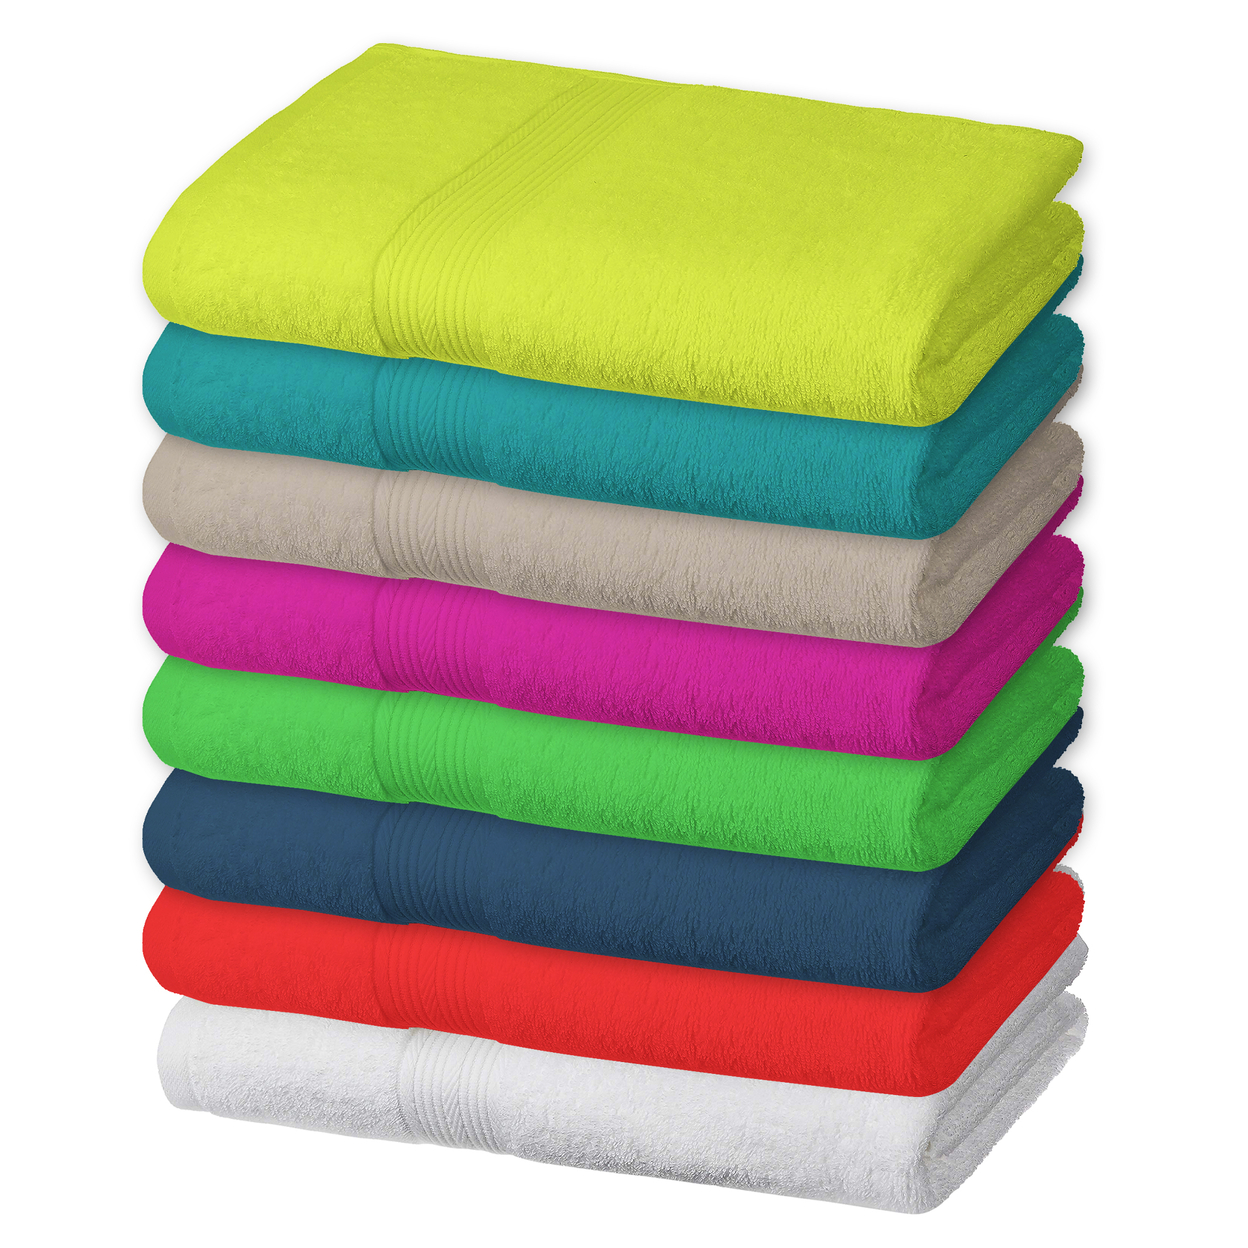 Multi-Pack: Super Absorbent 100% Cotton 54 X 27 Hotel Beach Bath Towels - 3-pack, Yellow